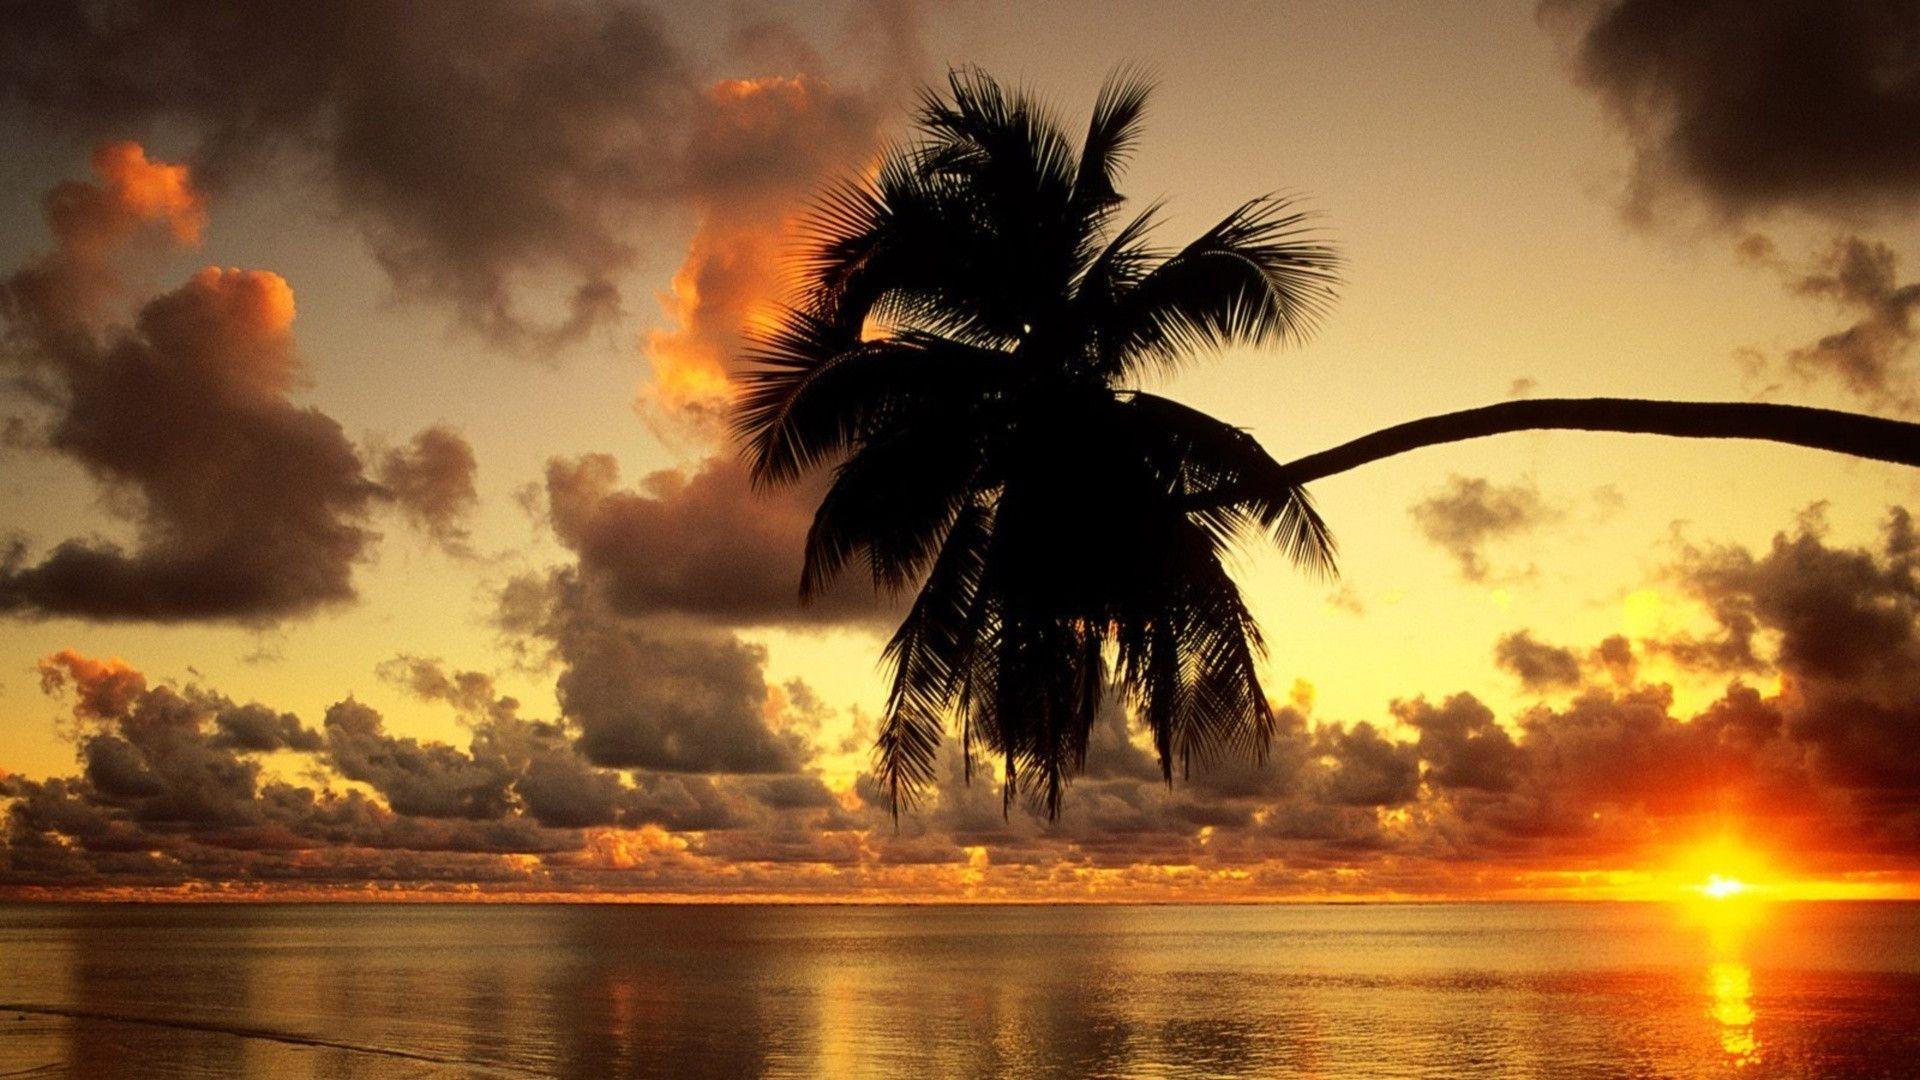 image For > Tropical Sunset Wallpaper HD